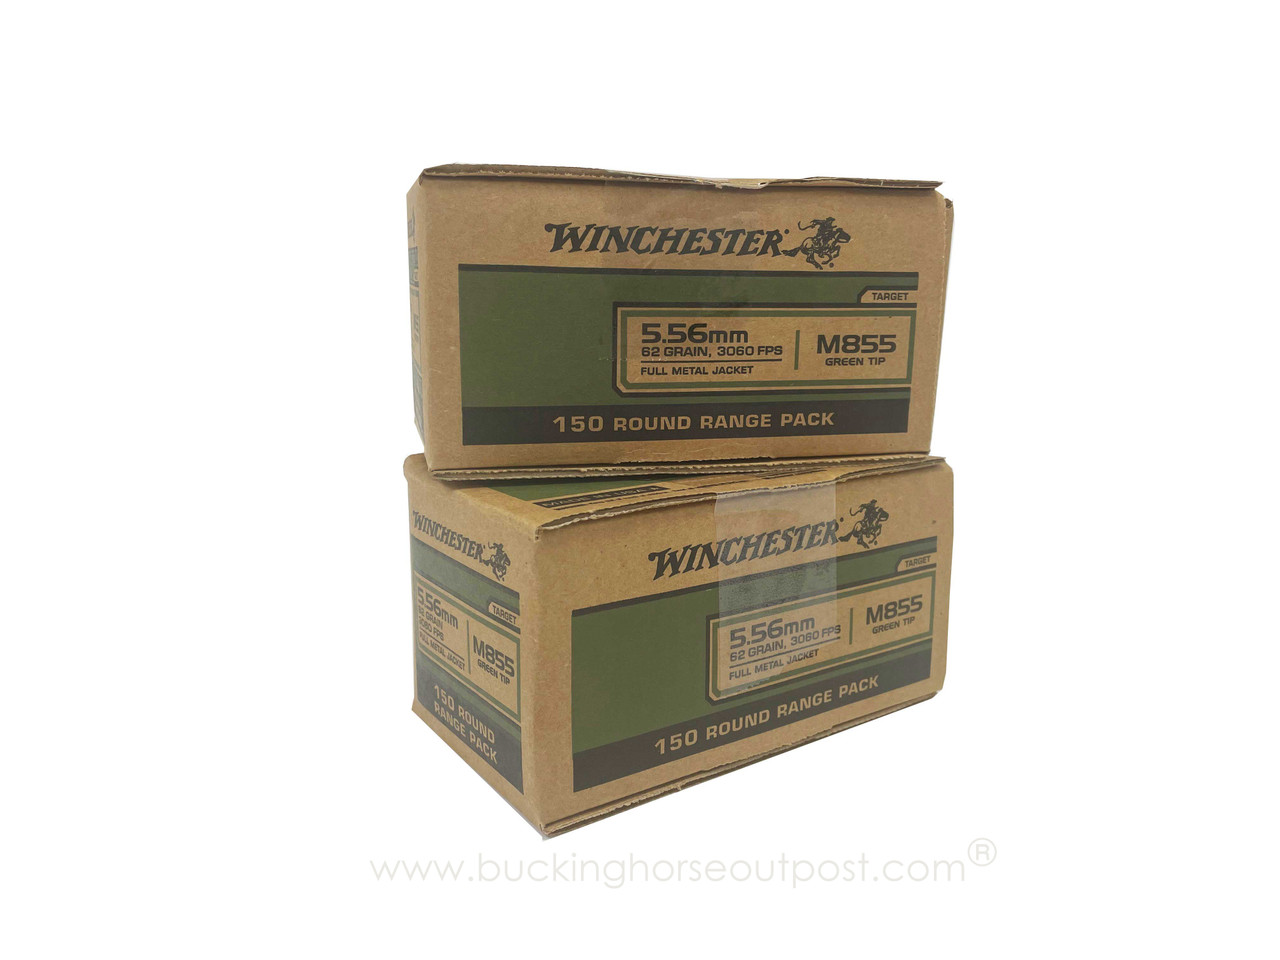 Winchester M855 5.56x45mm 62 Grain Green Tip Full Metal Jacket 150rds Per Box (WM855150)- FREE SHIPPING ON ORDERS OVER $175